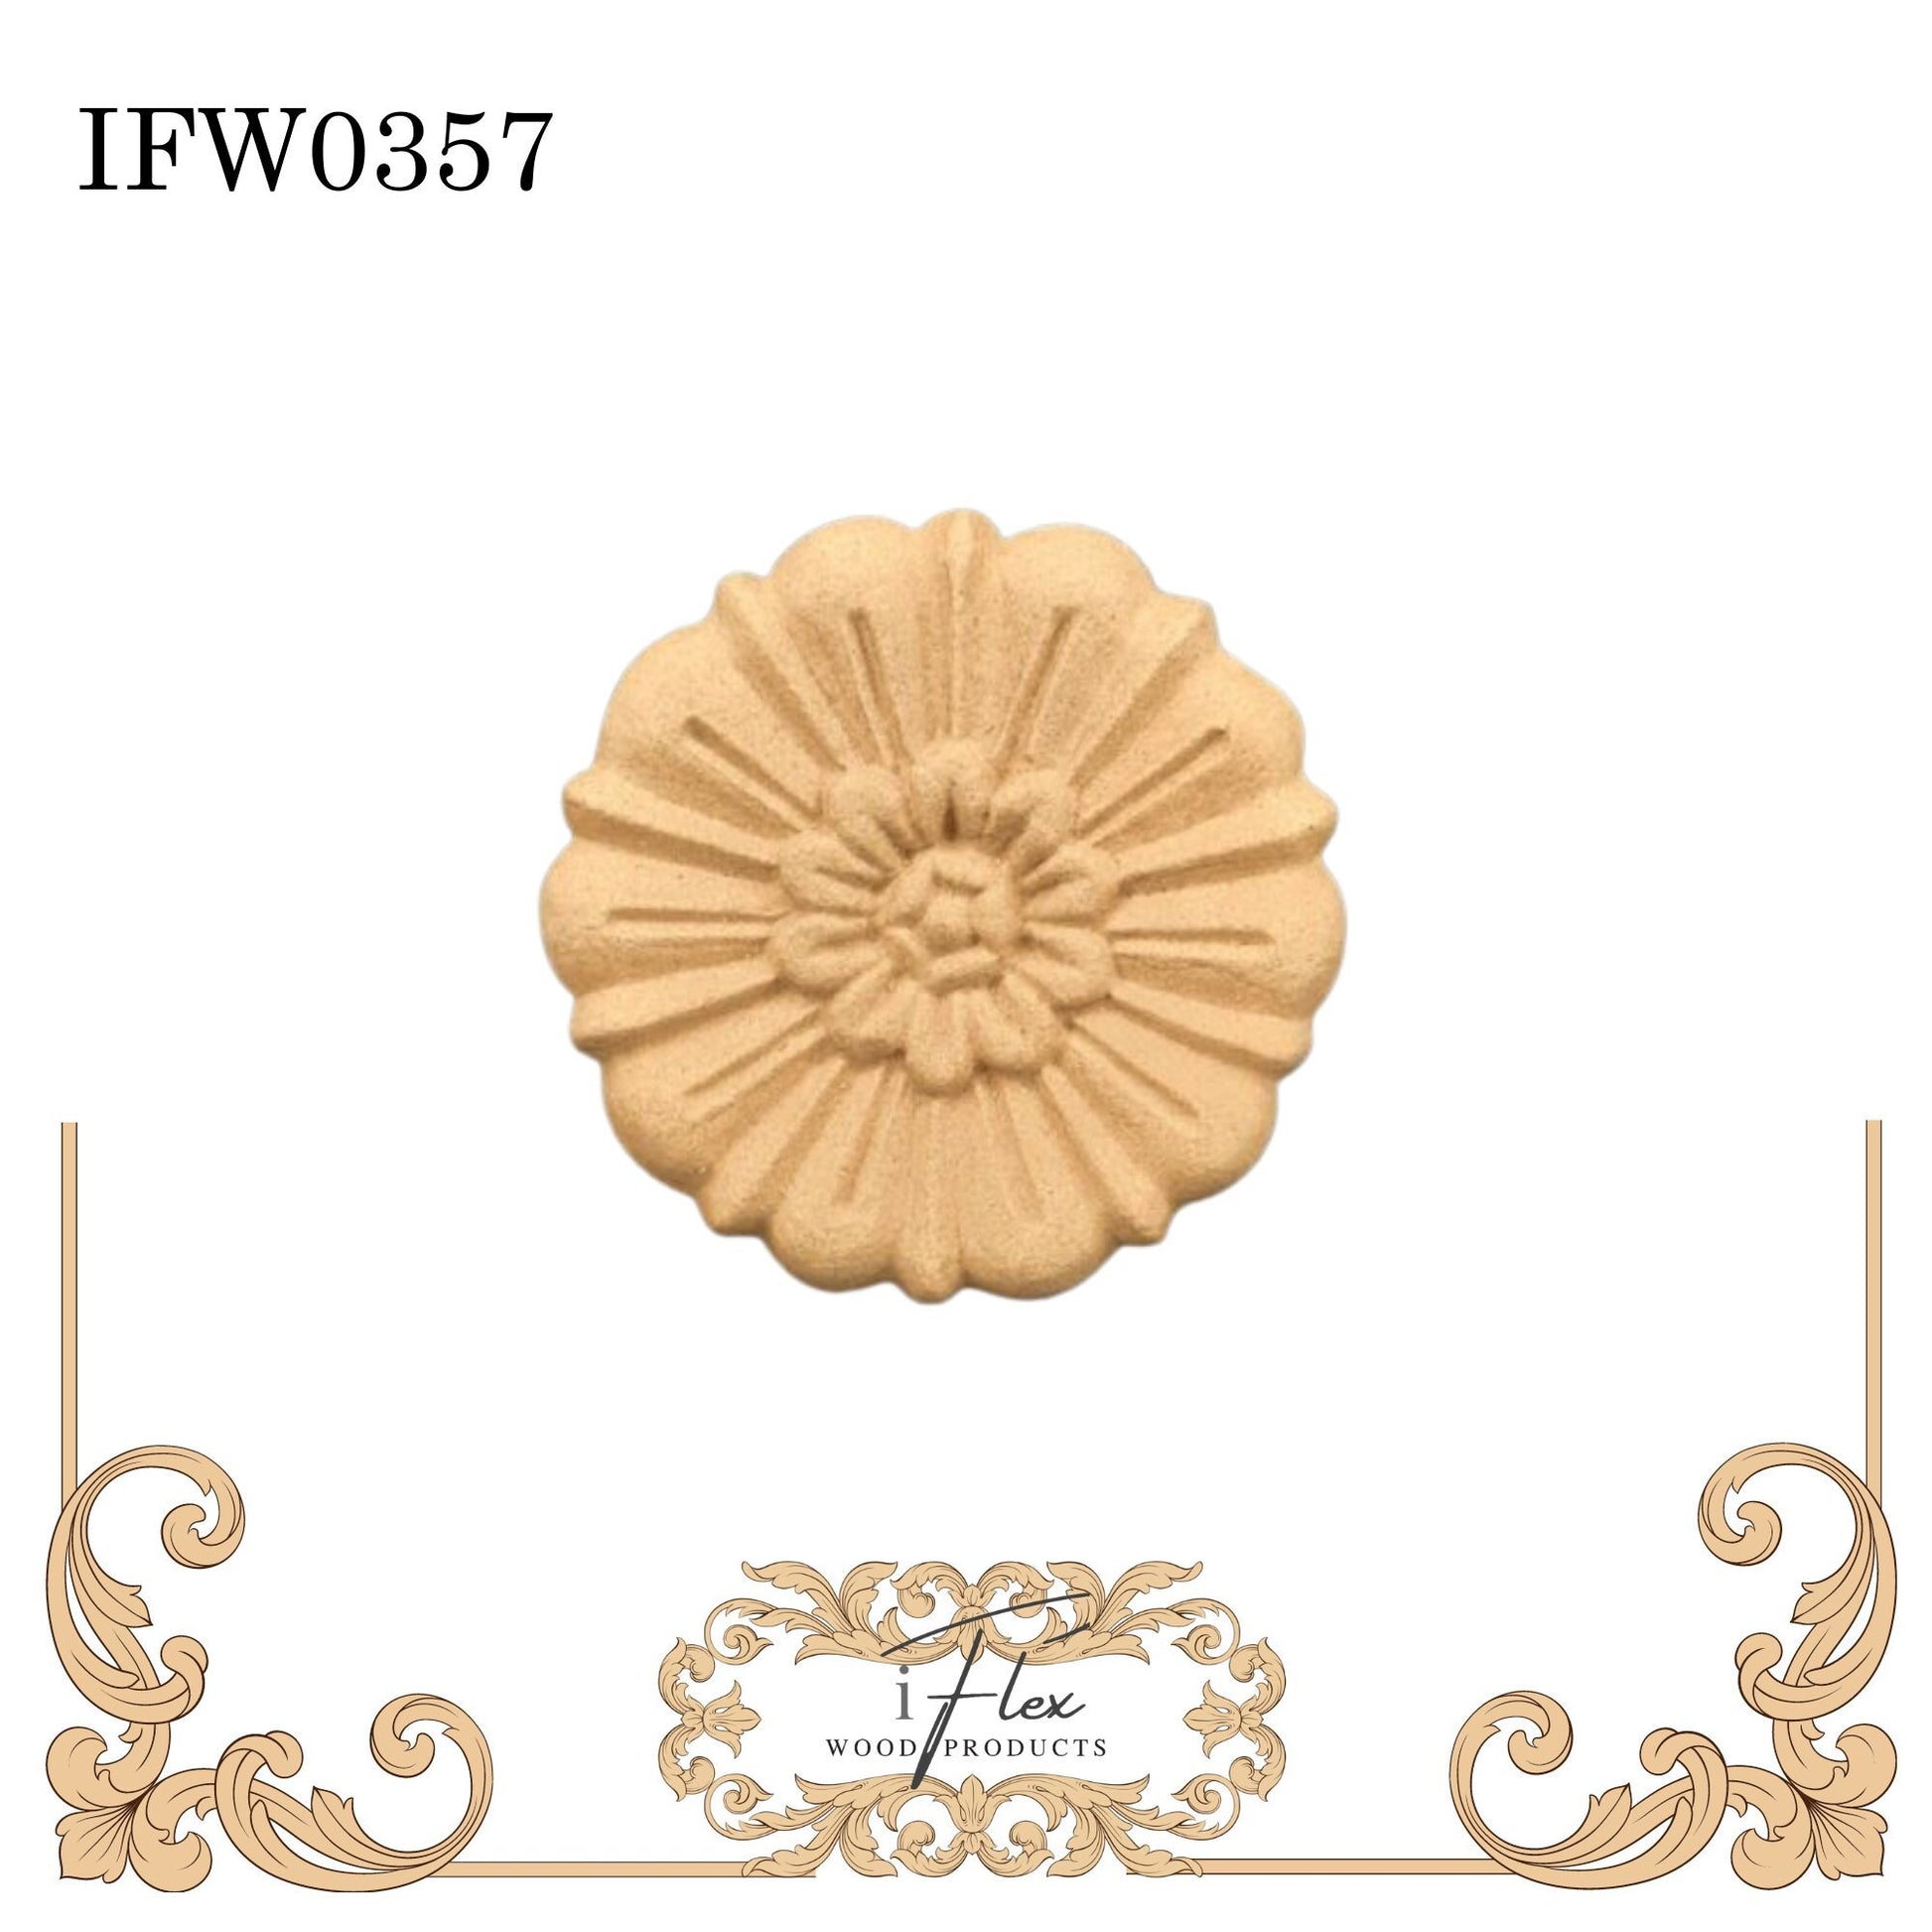 IFW 0357  iFlex Wood Products Flower bendable mouldings, flexible, wooden appliques